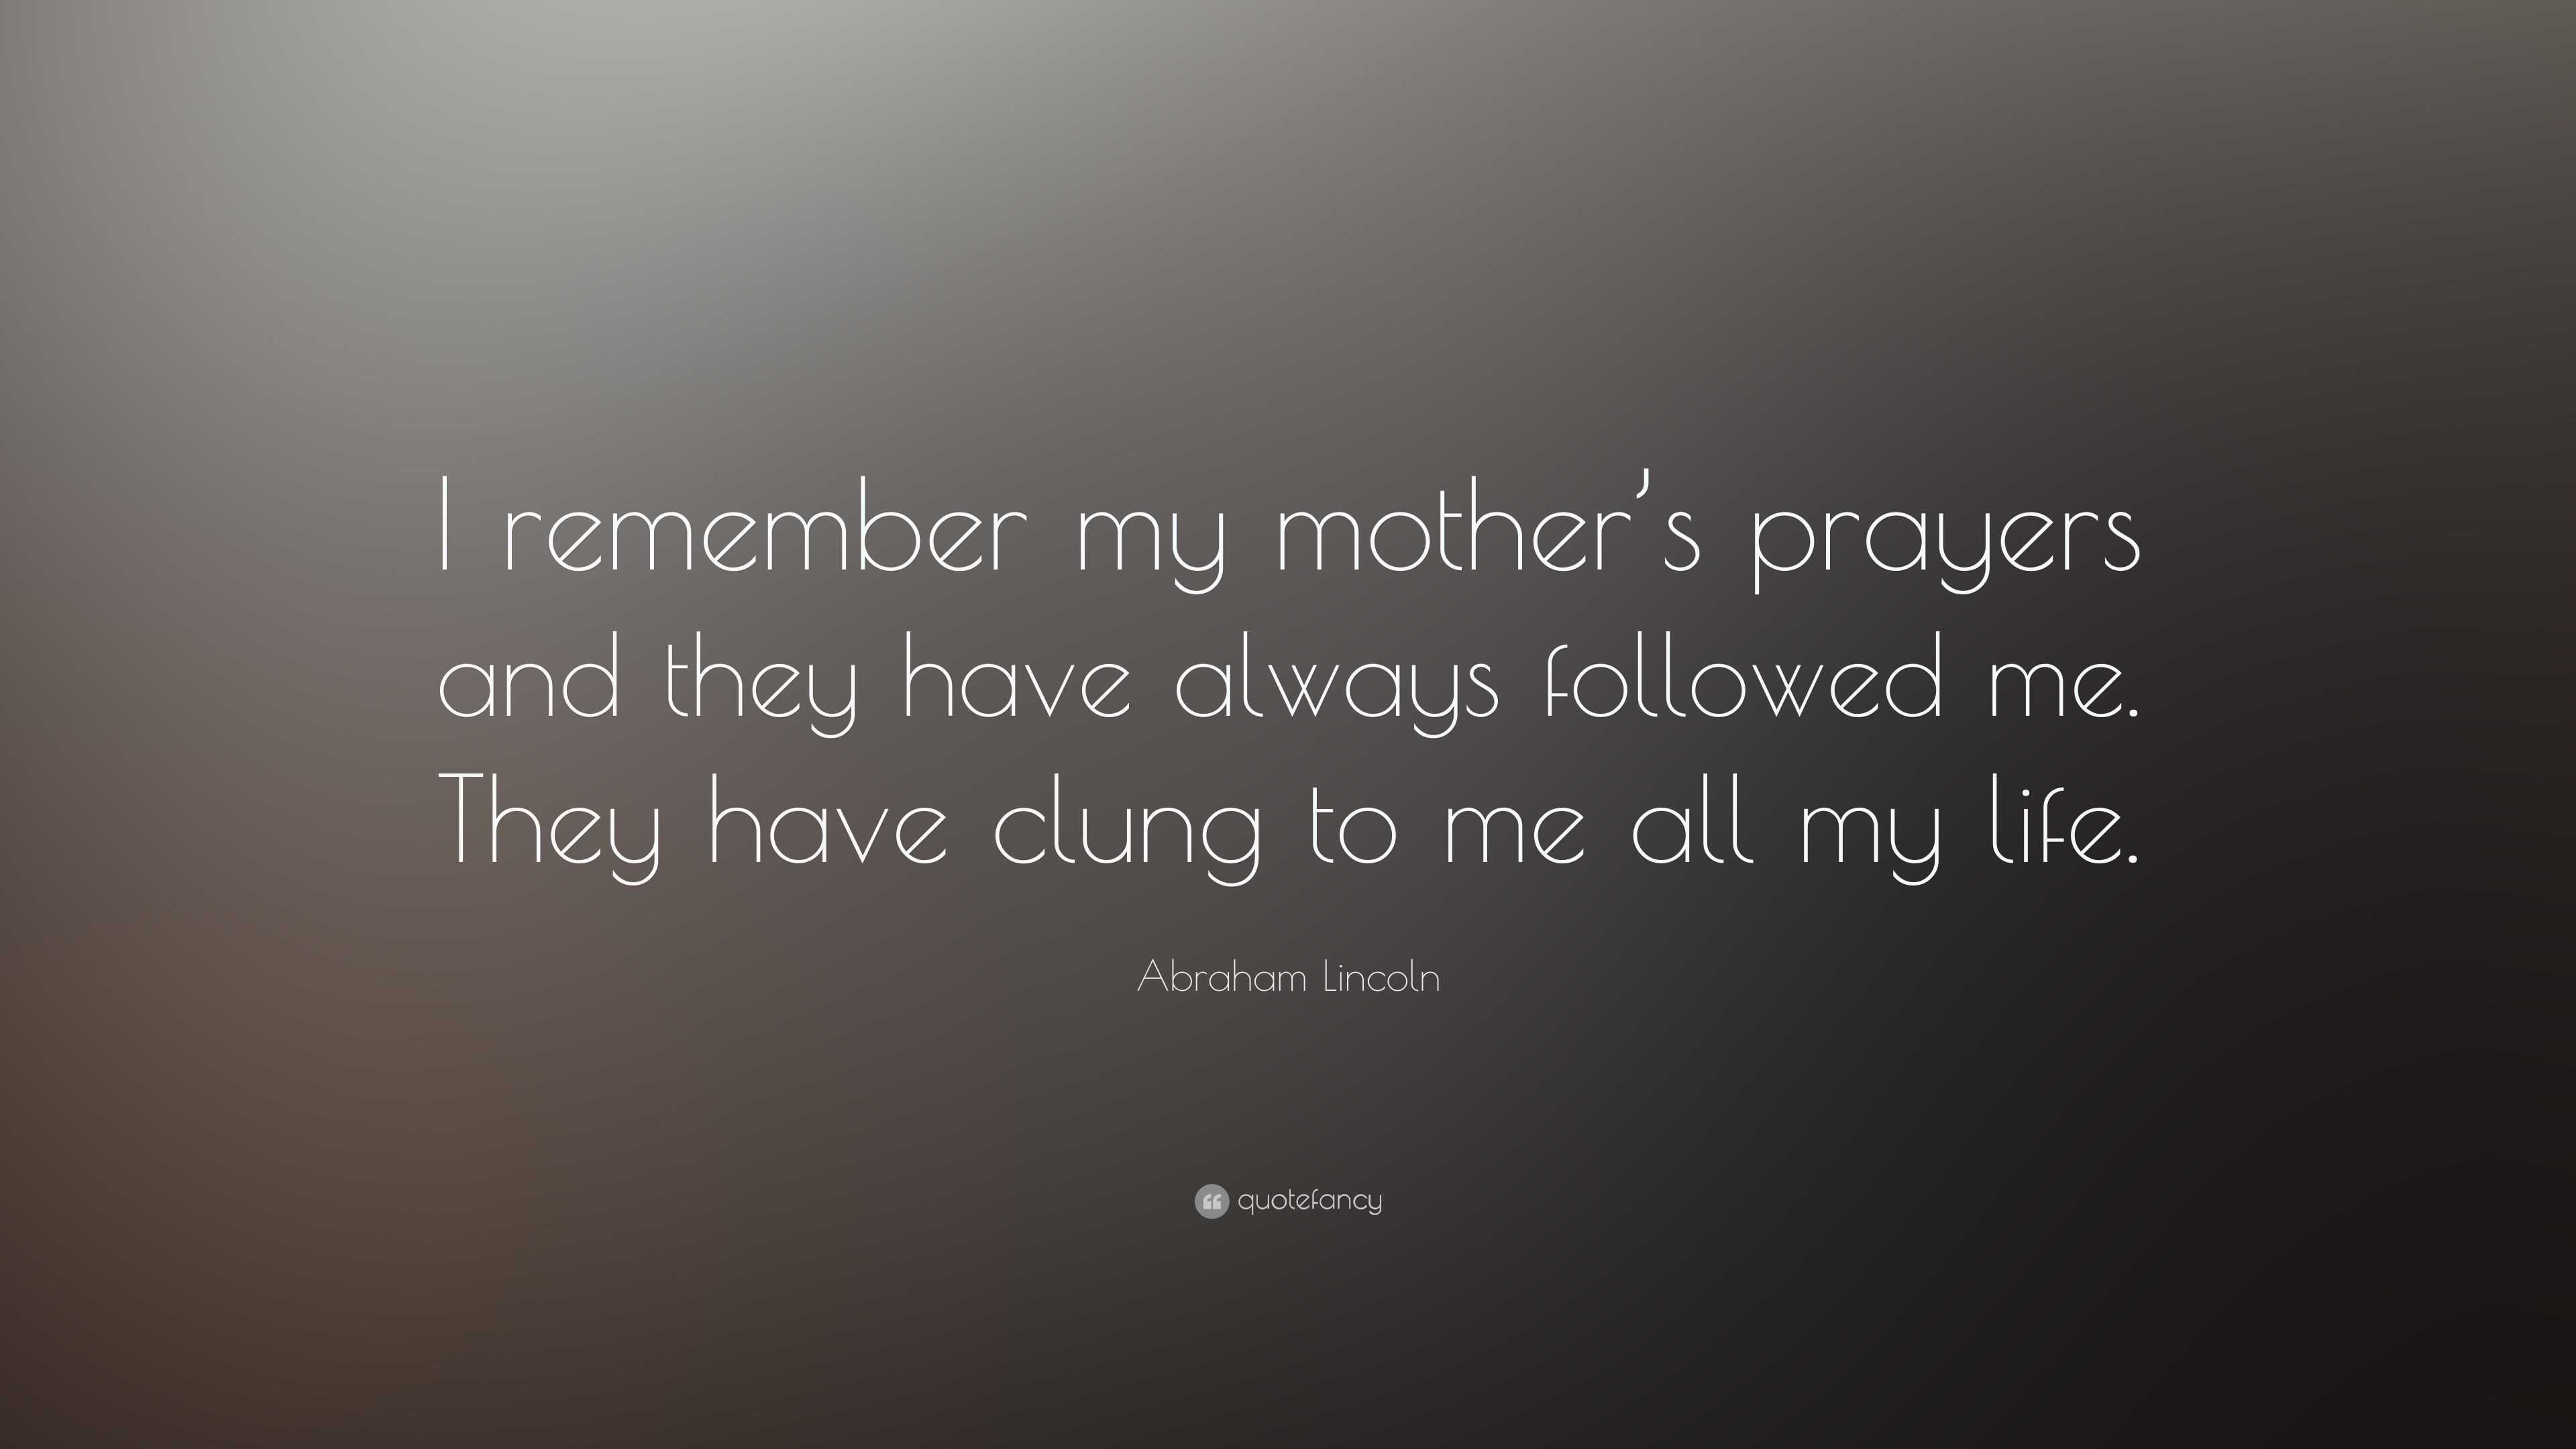 Abraham Lincoln Quote: "I remember my mother's prayers and they have always followed me. They ...